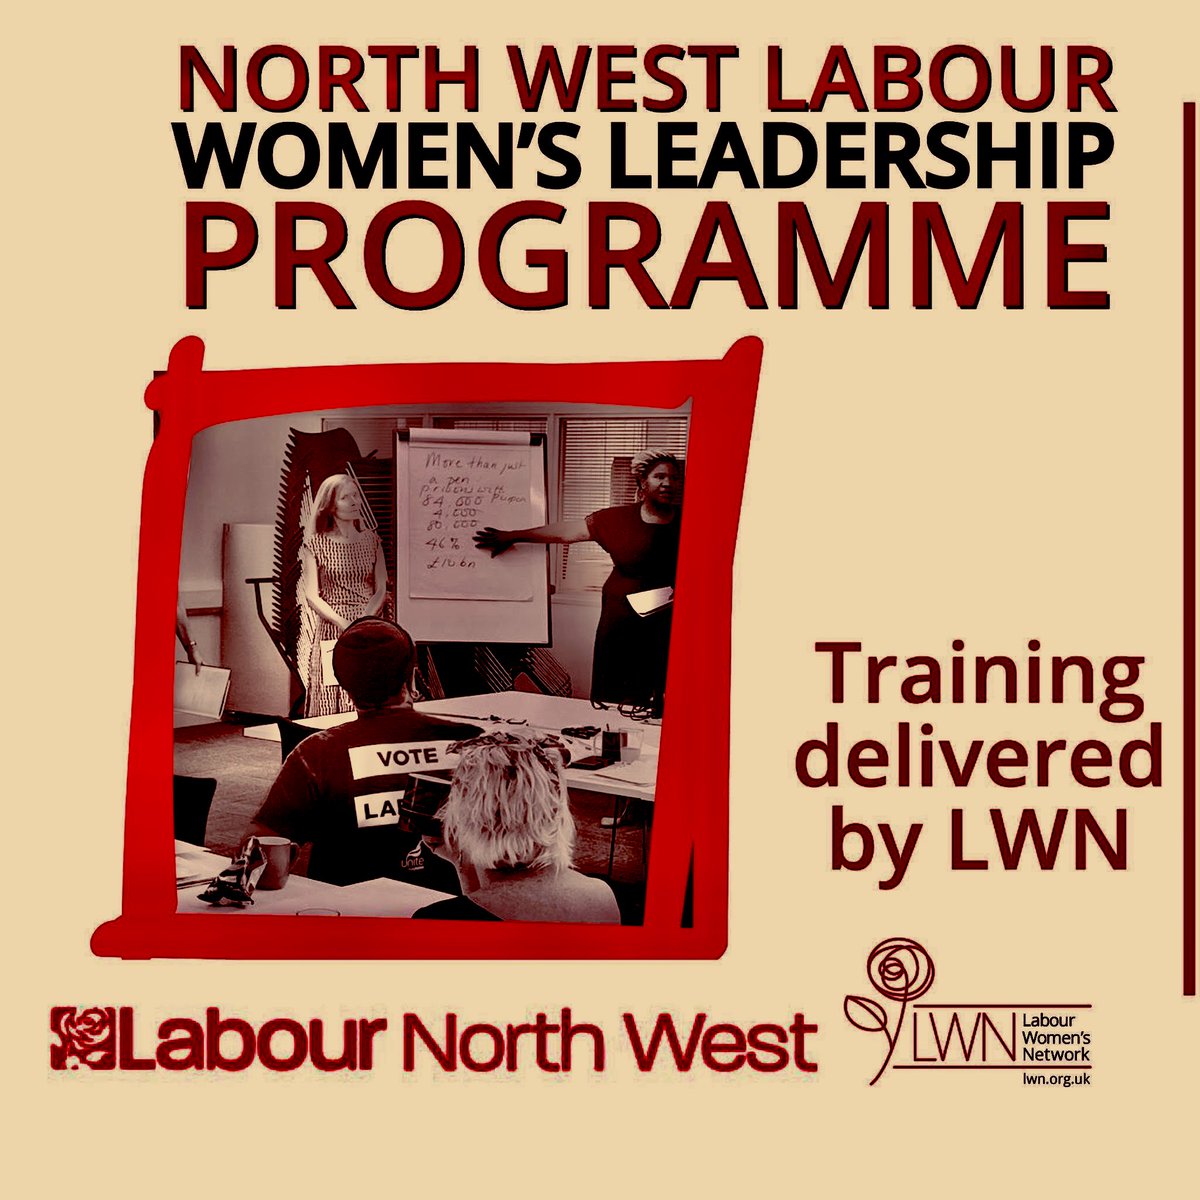 Calling all @LabourNorthWest sisters! Why not apply to invest in yourself this weekend? The first ever North West Labour Women's Leadership Programme is open for applications. Boost your political future!🌹 Deadline midnight Sunday. For all info visit: lwn.org.uk/nw_women_in_le…